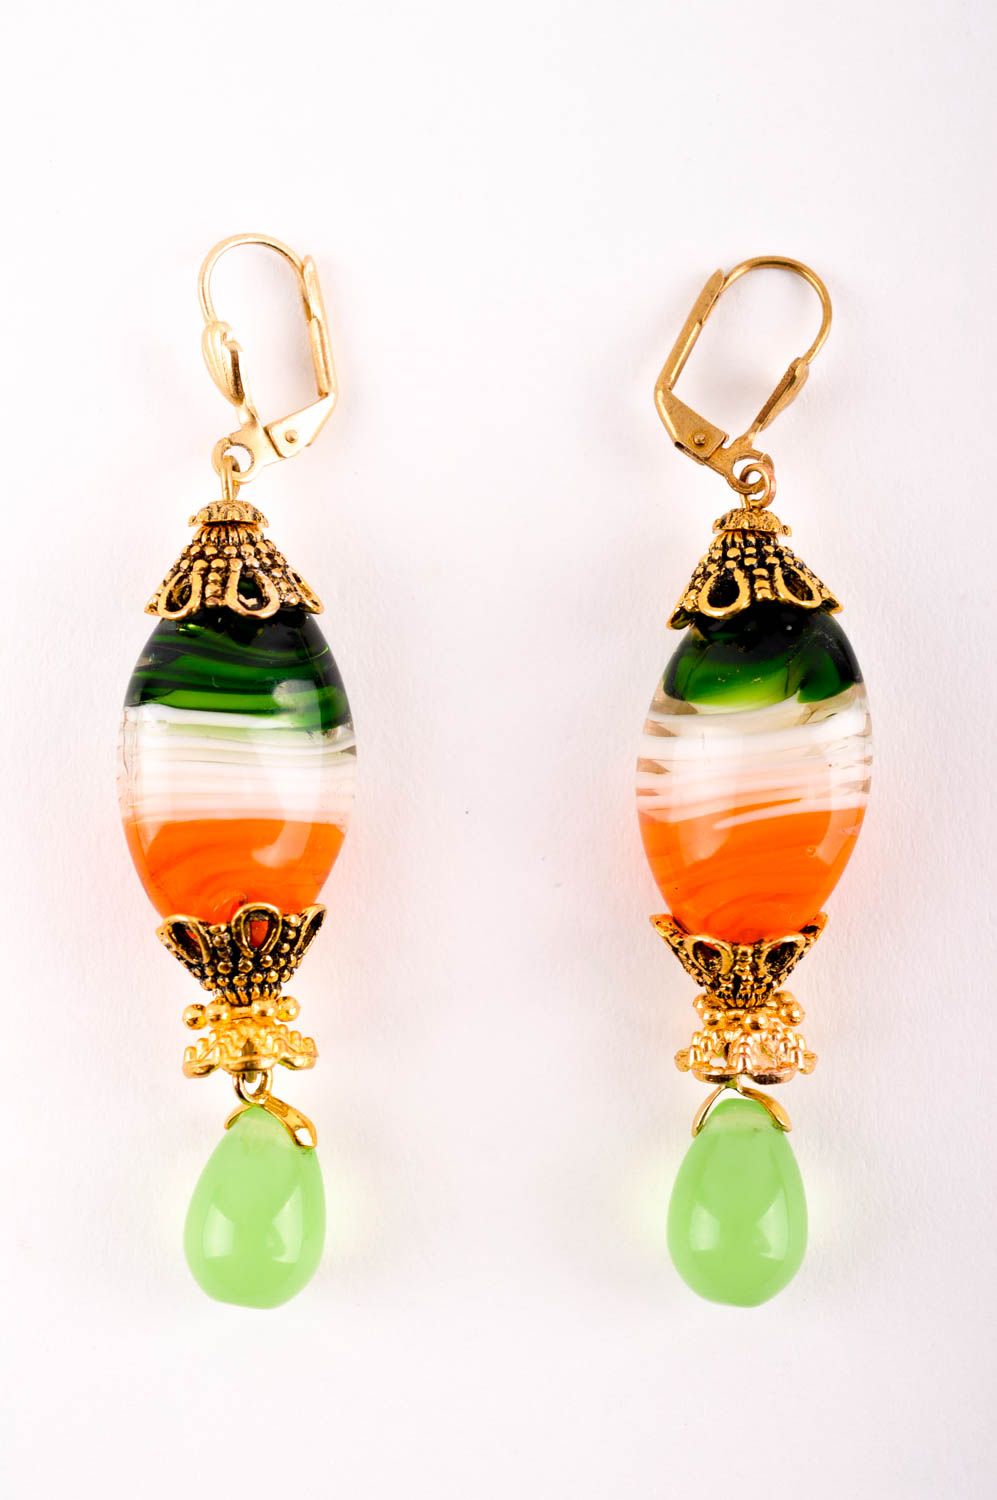 Designer earrings handmade glass earrings with charms fashion designer jewelry photo 3